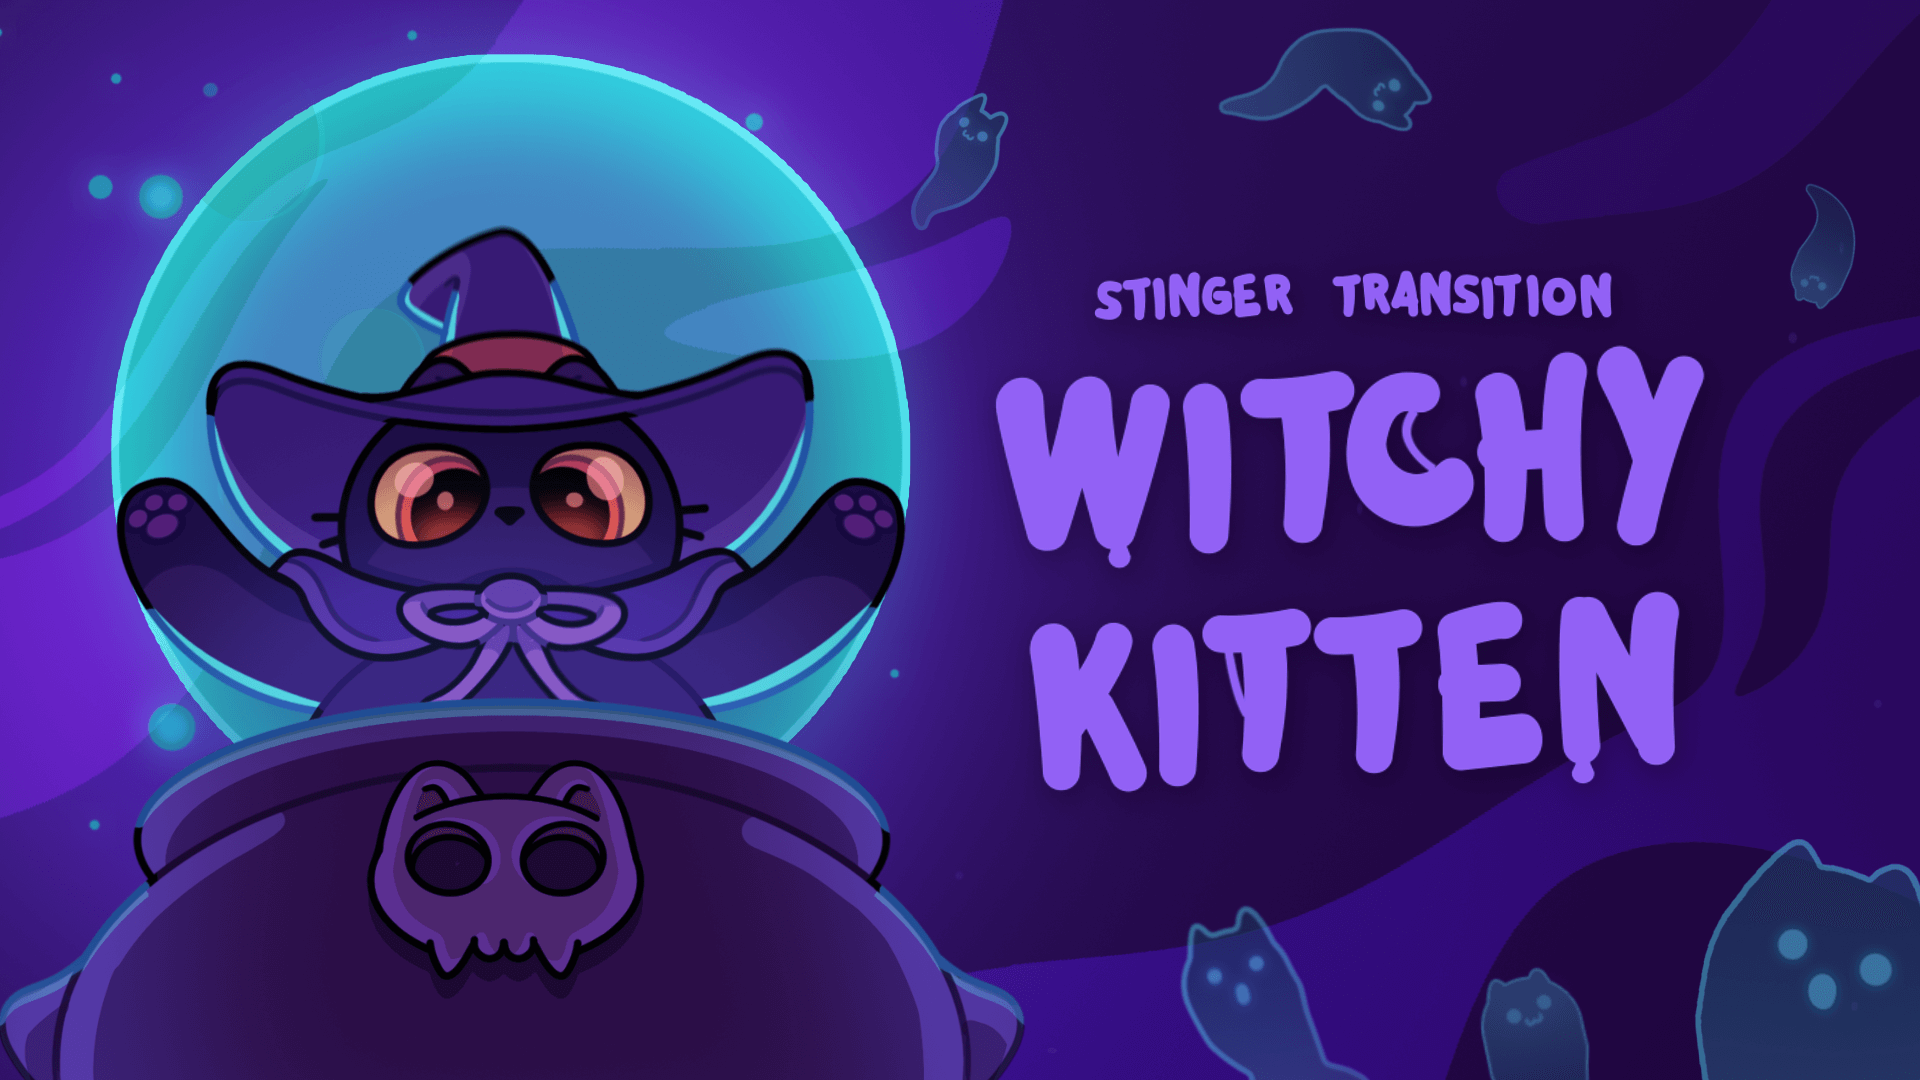 Witchy Kitten - Stinger Transition for Twitch, Youtube and Facebook